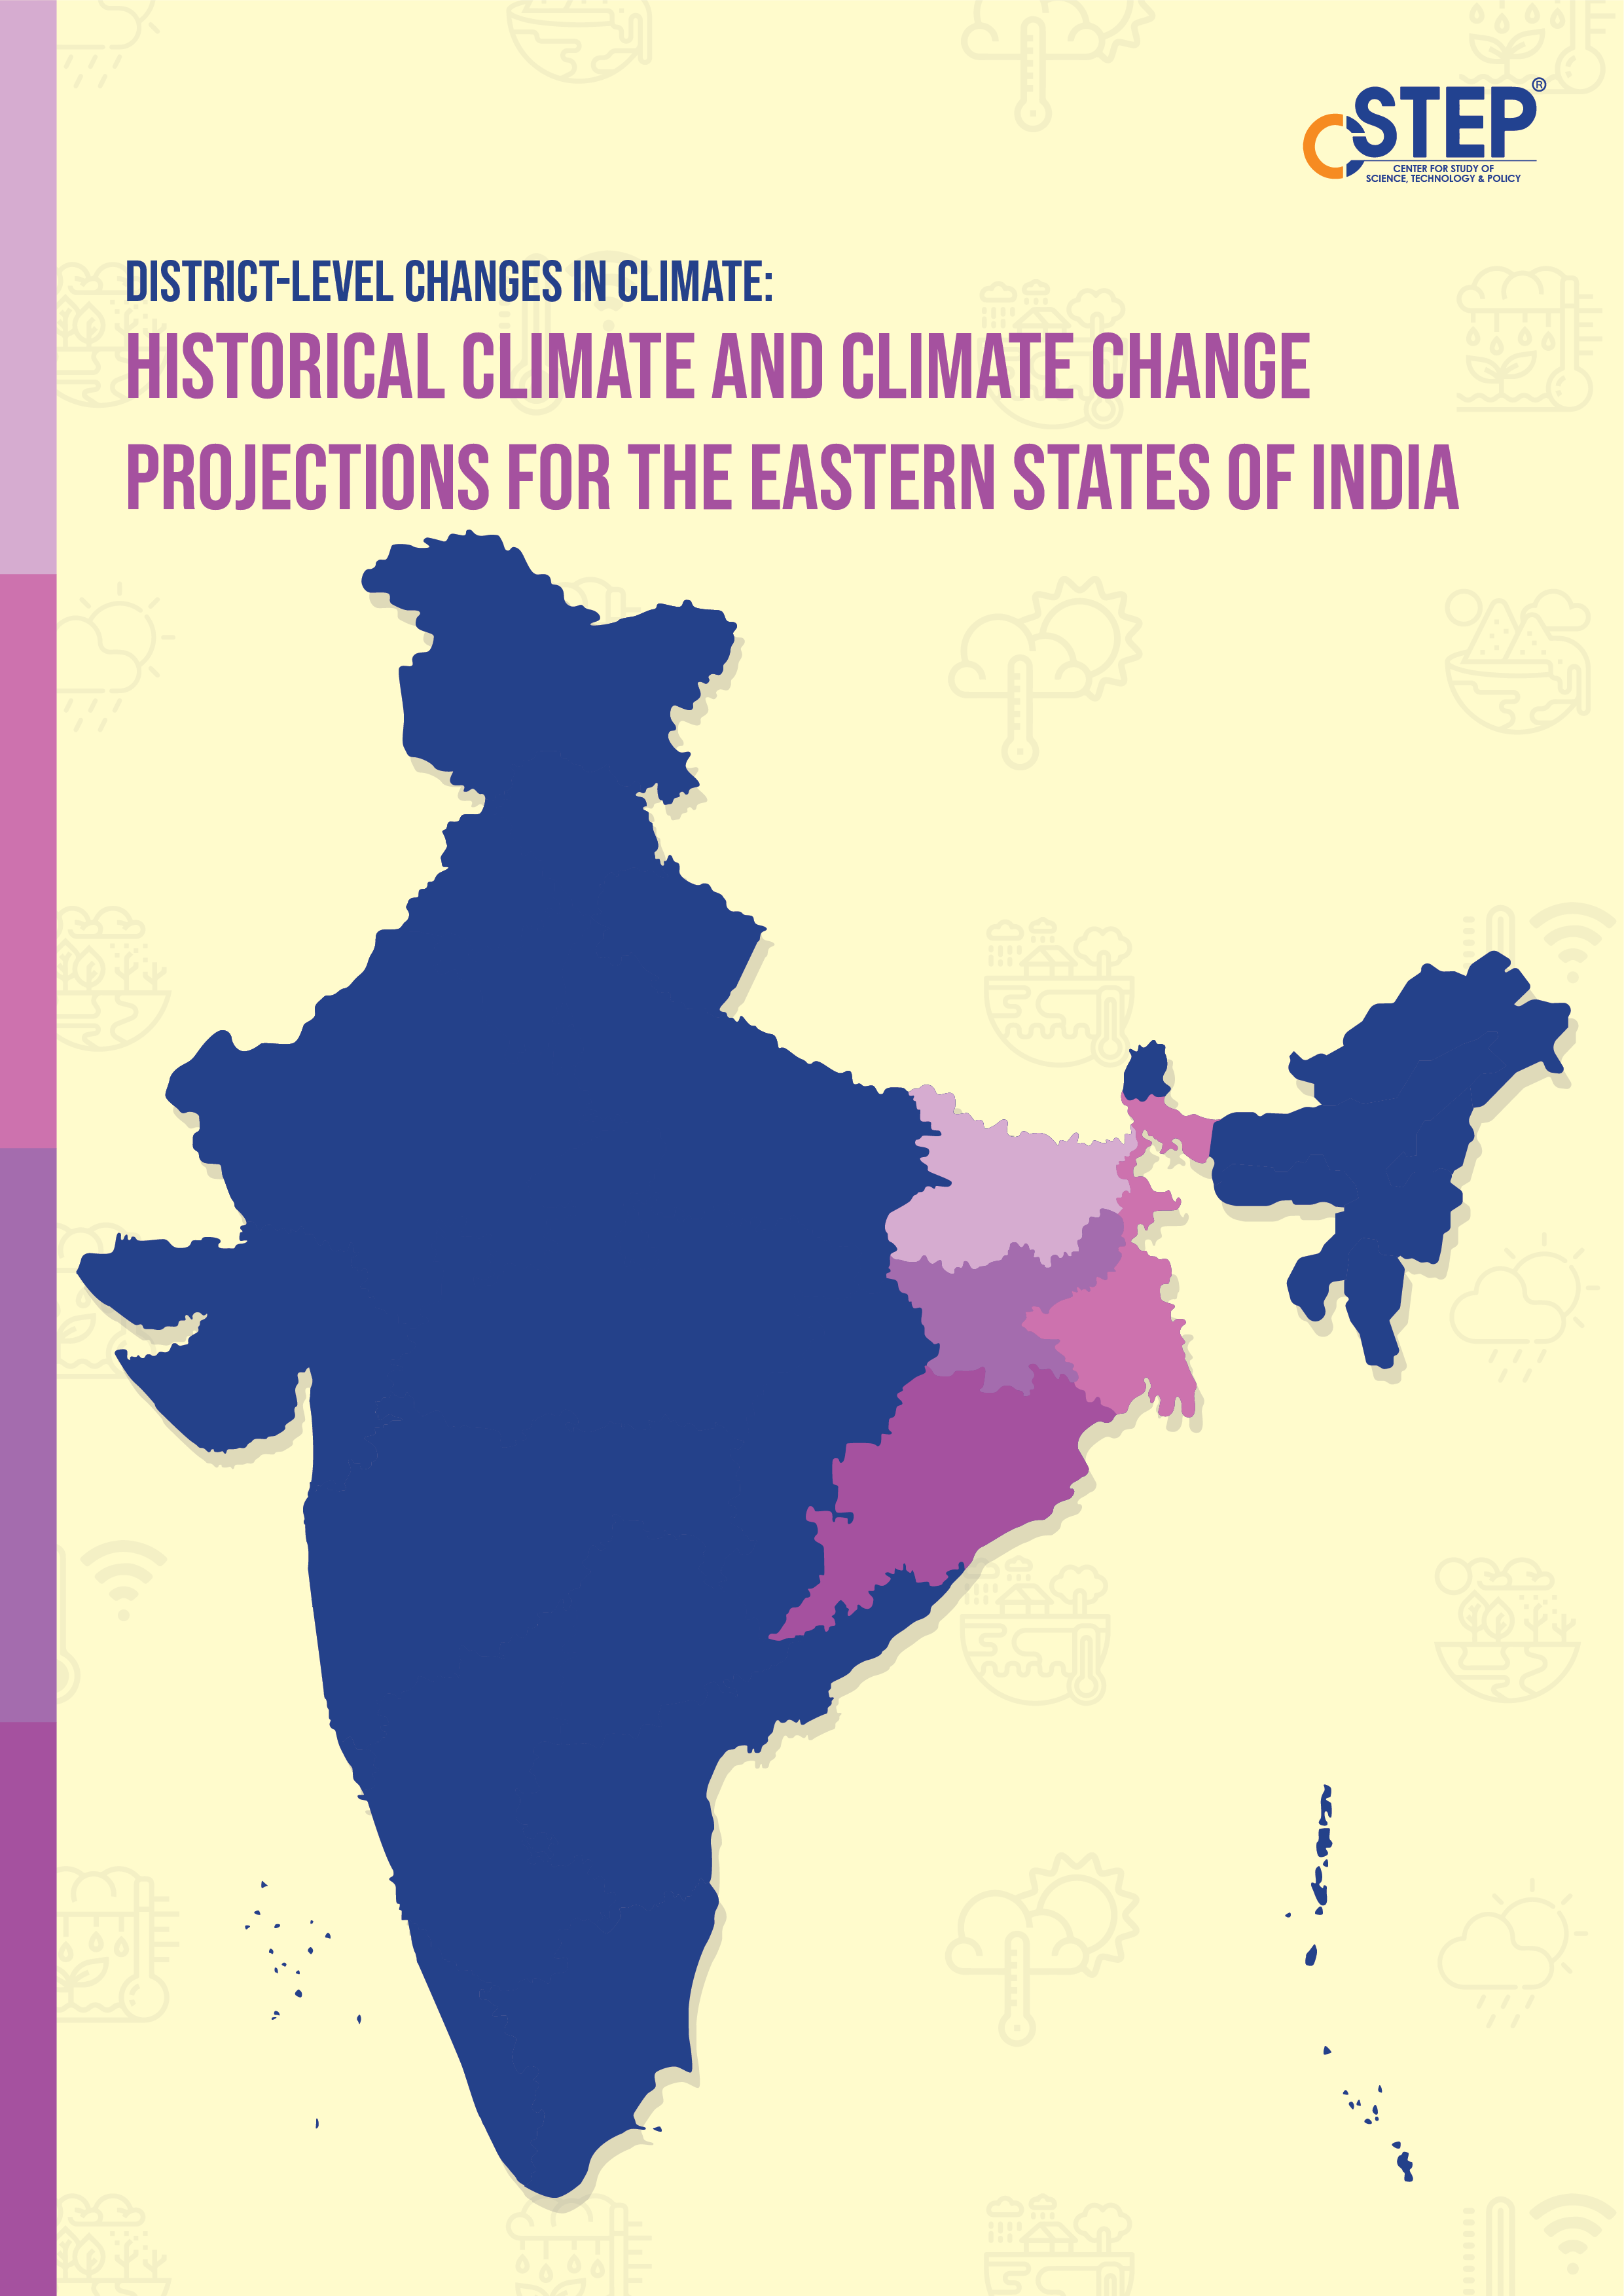 PRESS RELEASE - CSTEP Study: Prepare for Warmer Temperature and High-Intensity Rainfall Events in Eastern India